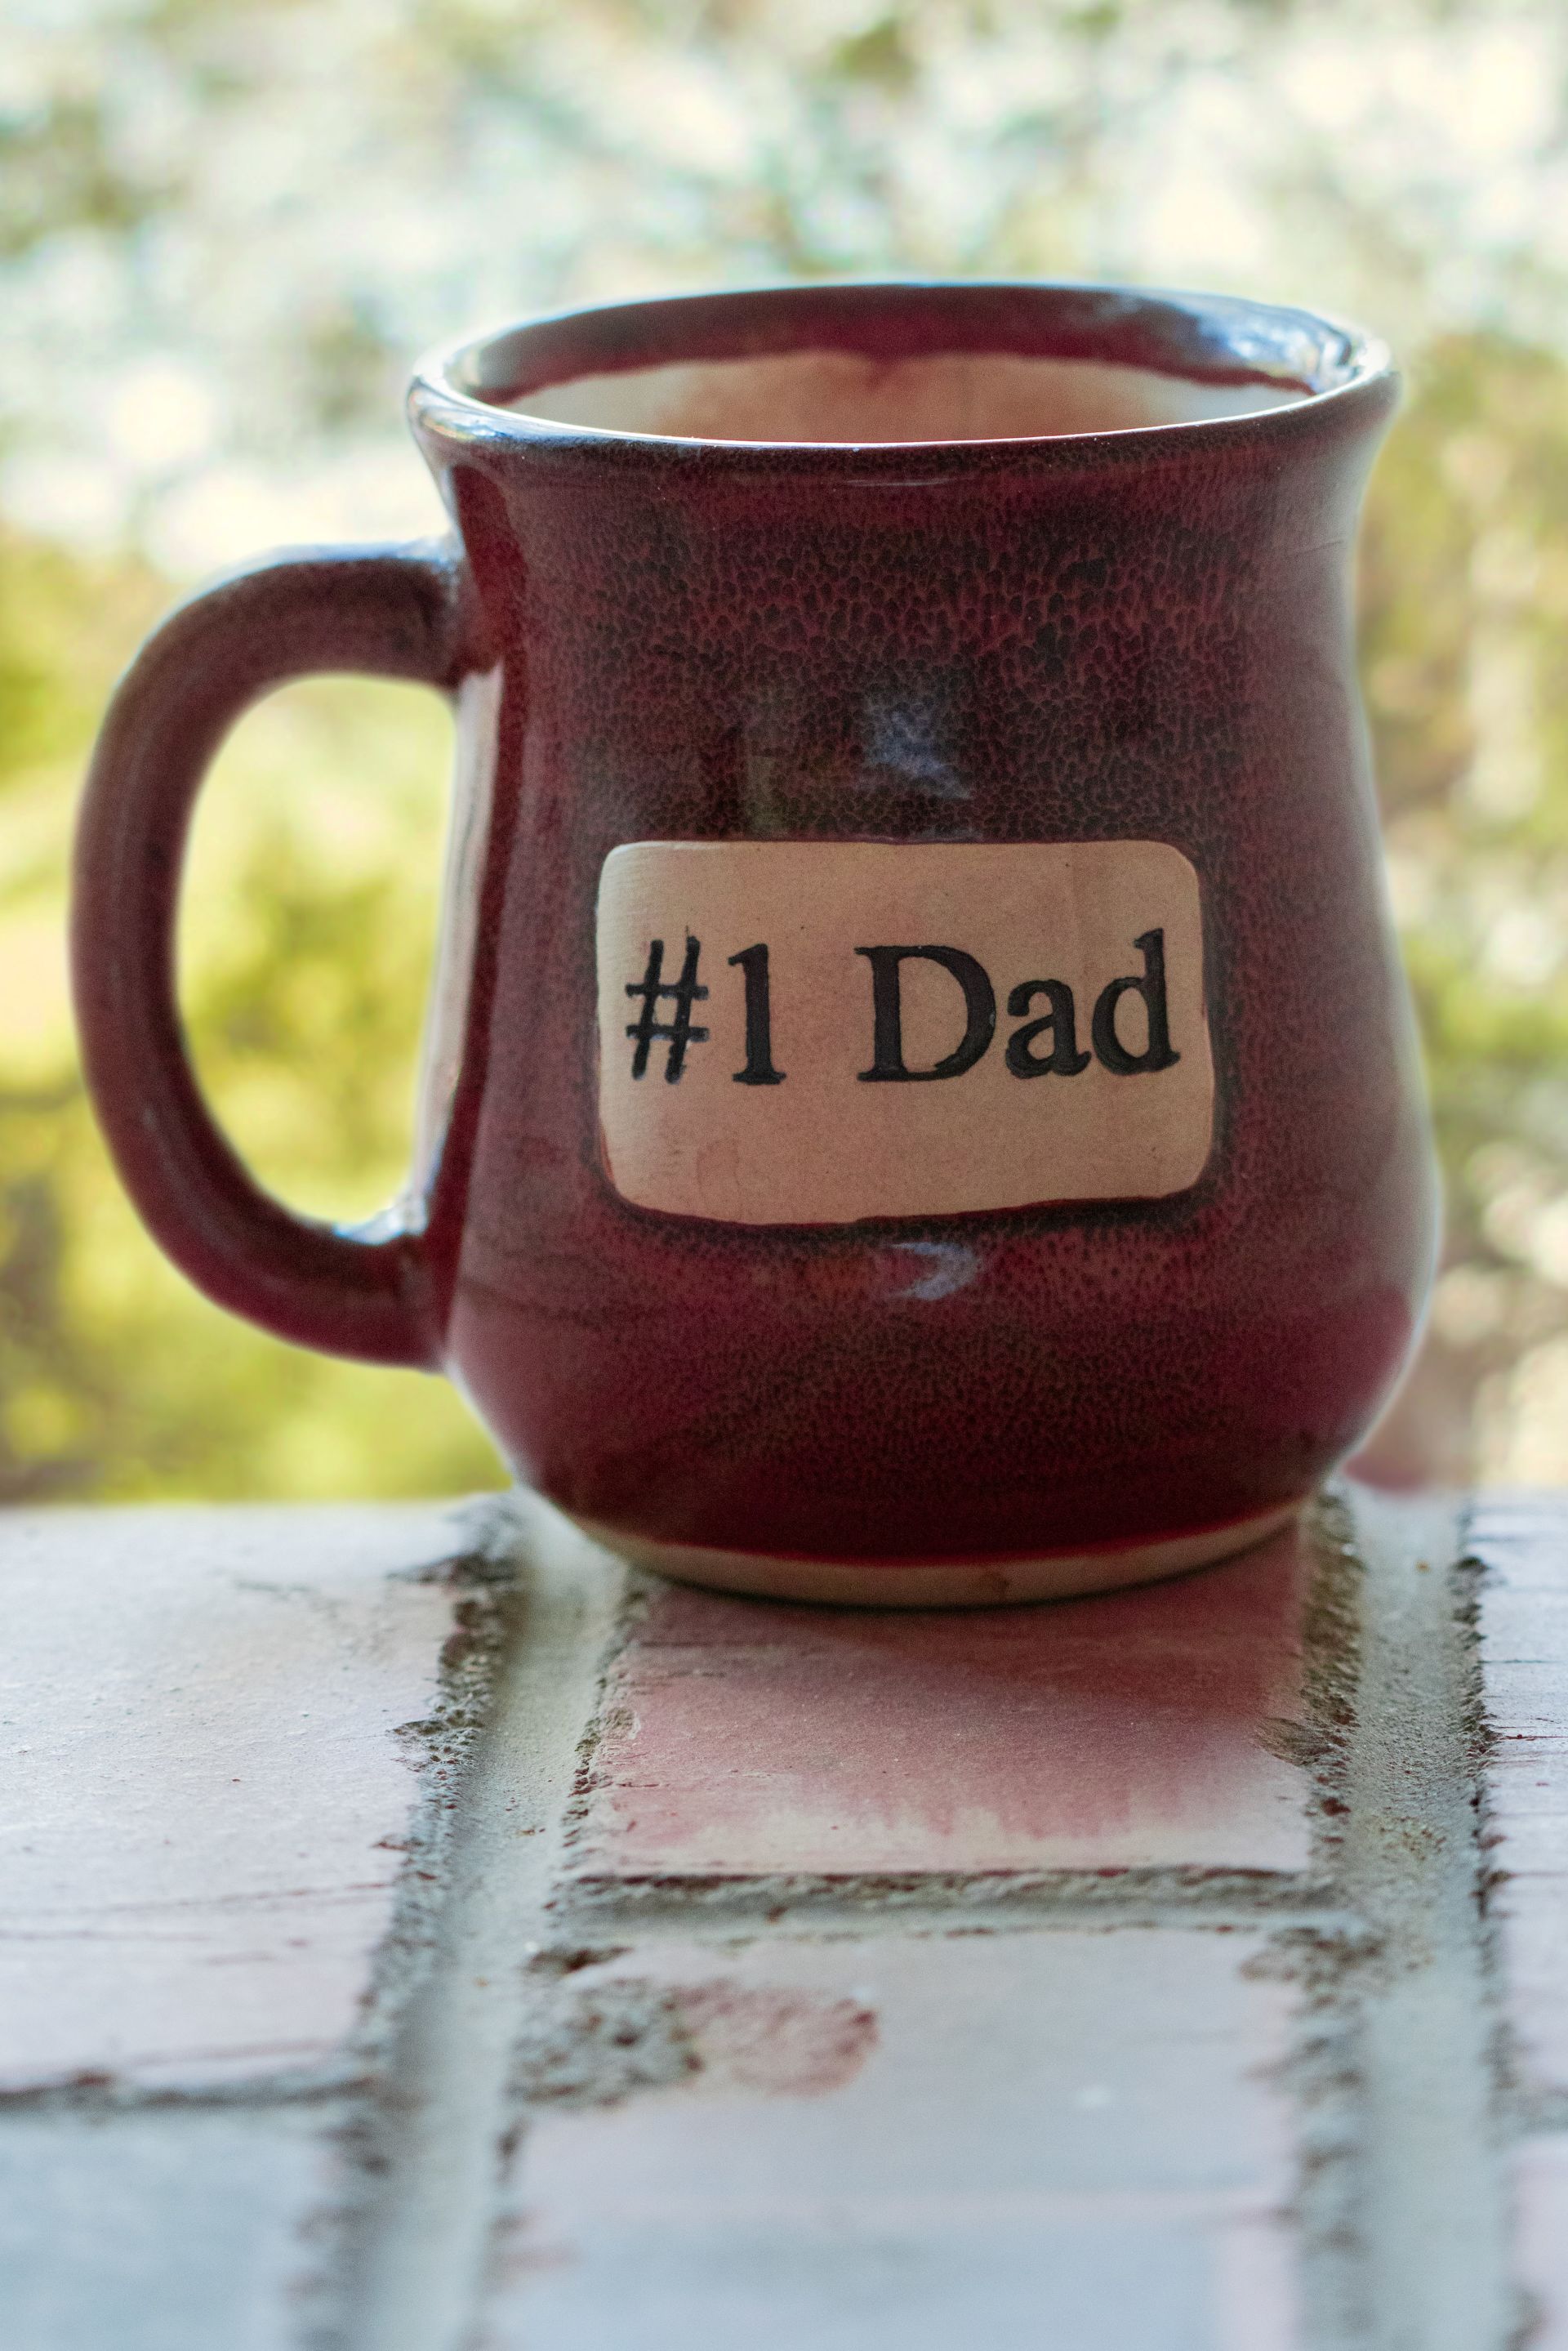 Last Minute Gift Ideas for Dad